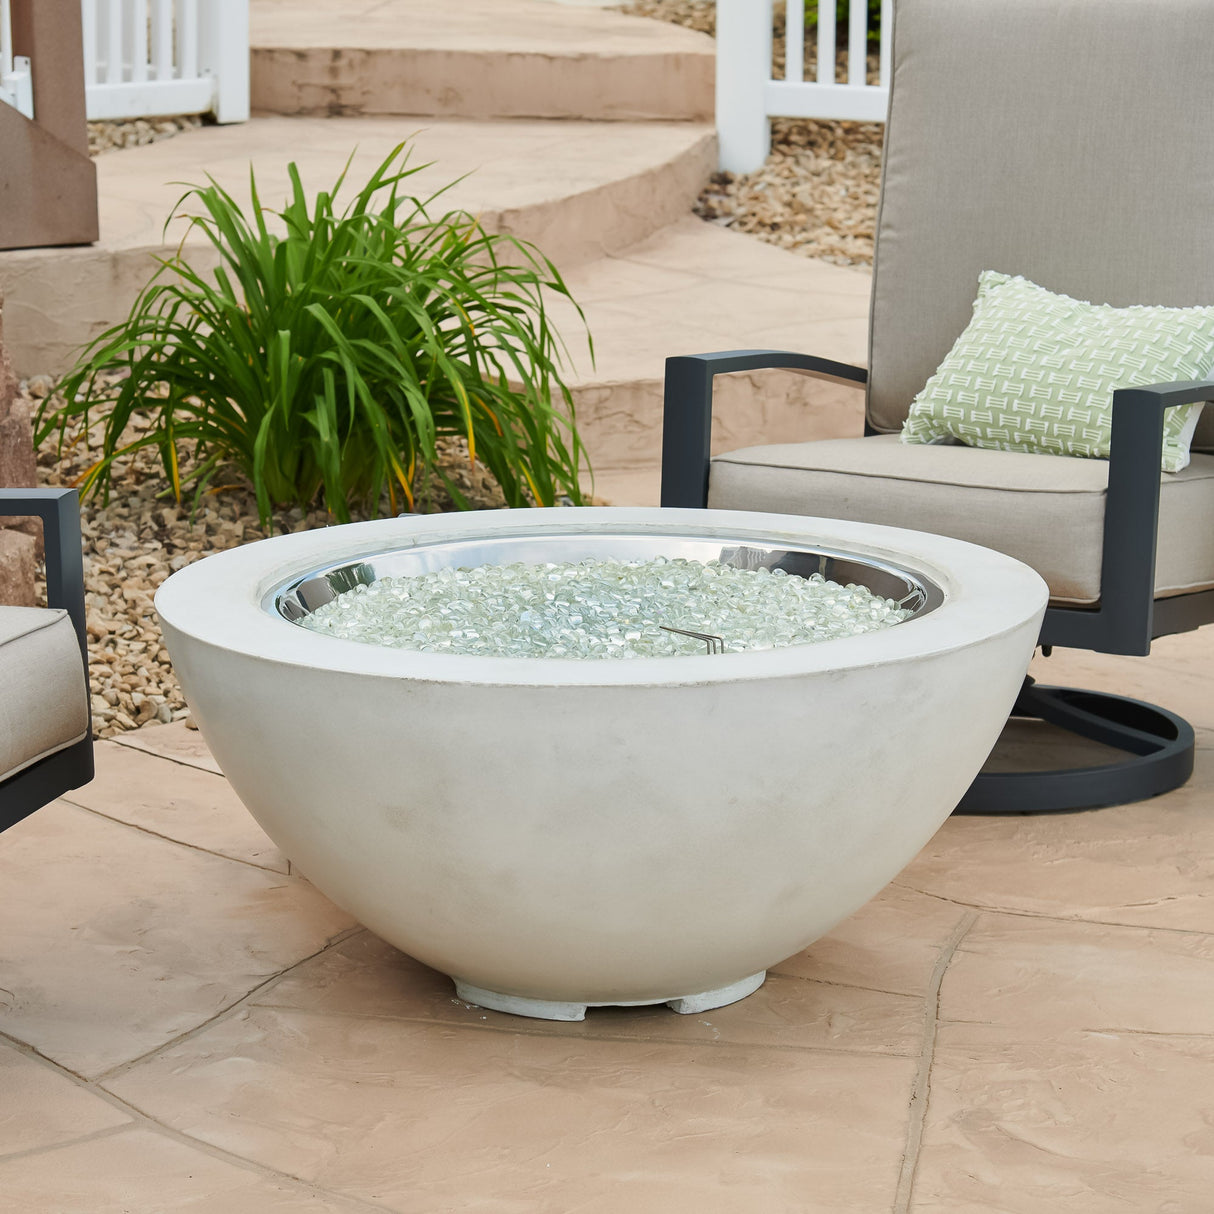 A White Cove Round Gas Fire Pit Bowl 42" with fire media on the burner and surrounded by patio furniture